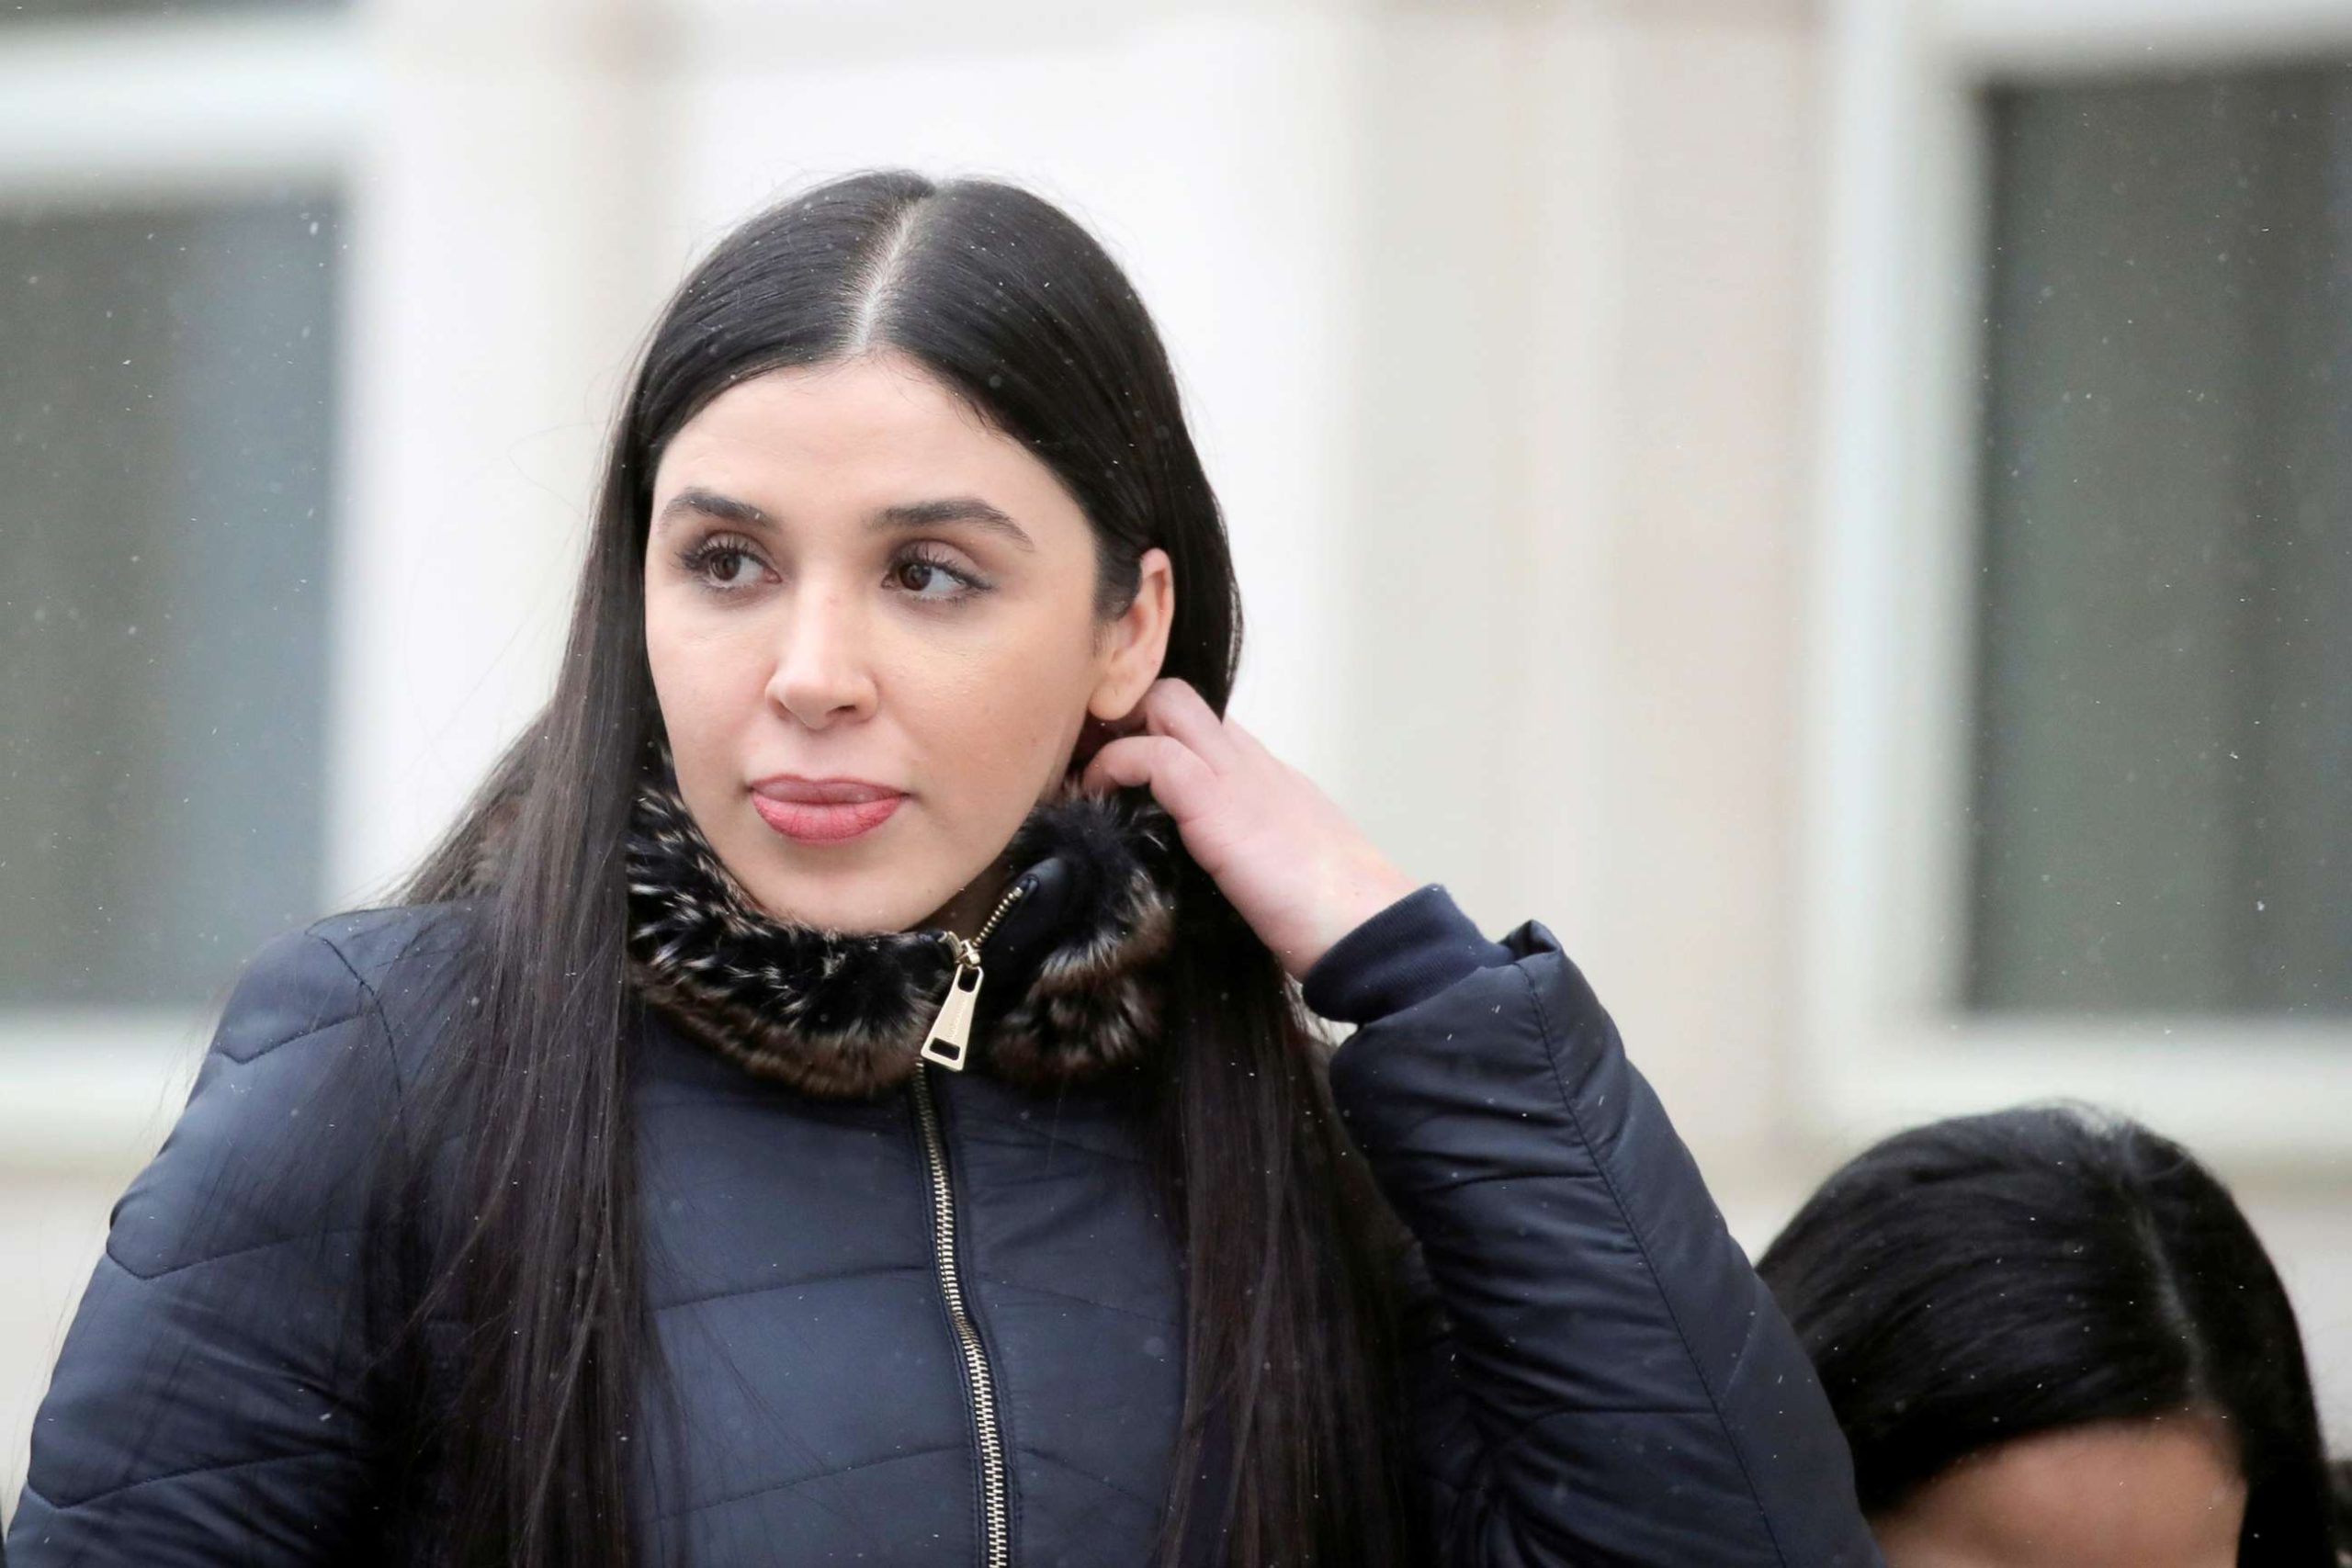 Release of El Chapo's wife from halfway house imminent after serving prison sentence